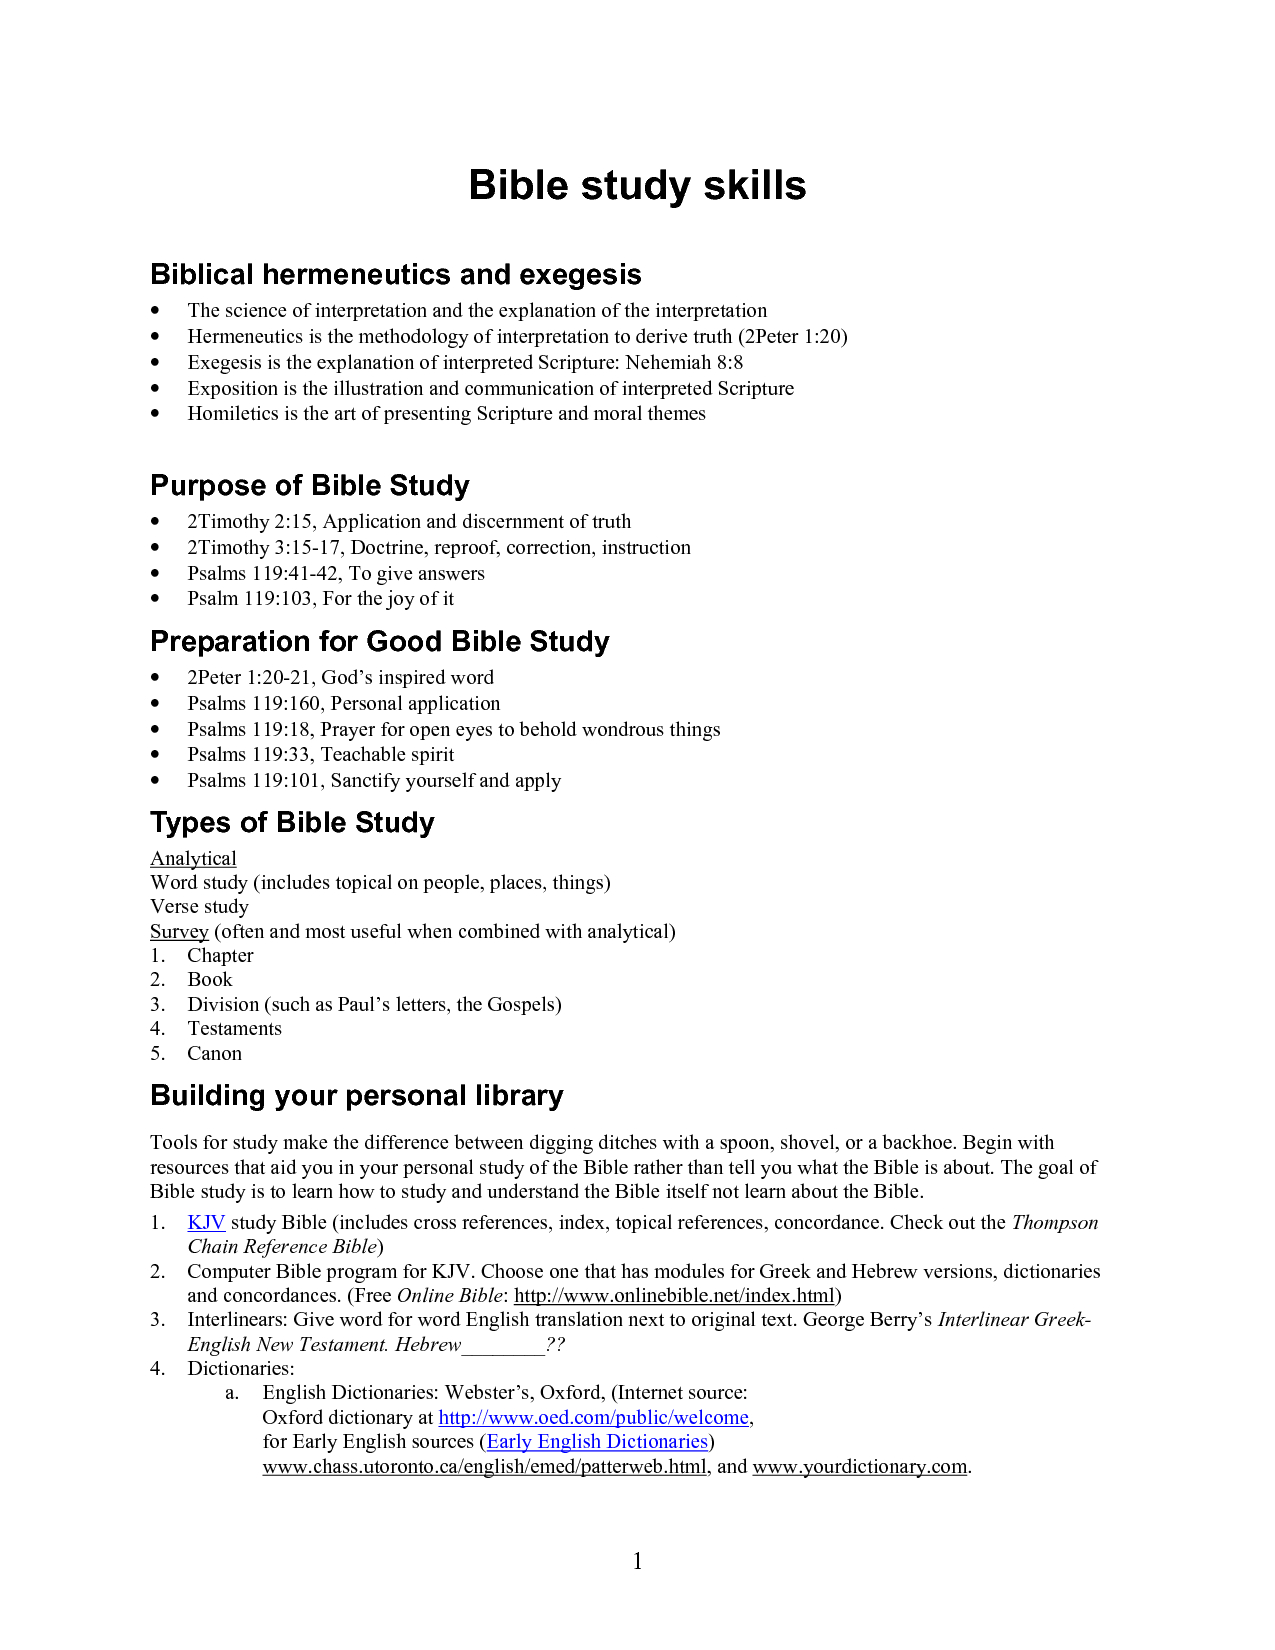 Free Bible Worksheets For Adults | Poweredtumblr . Minimal Theme - Free Printable Bible Study Worksheets For Adults